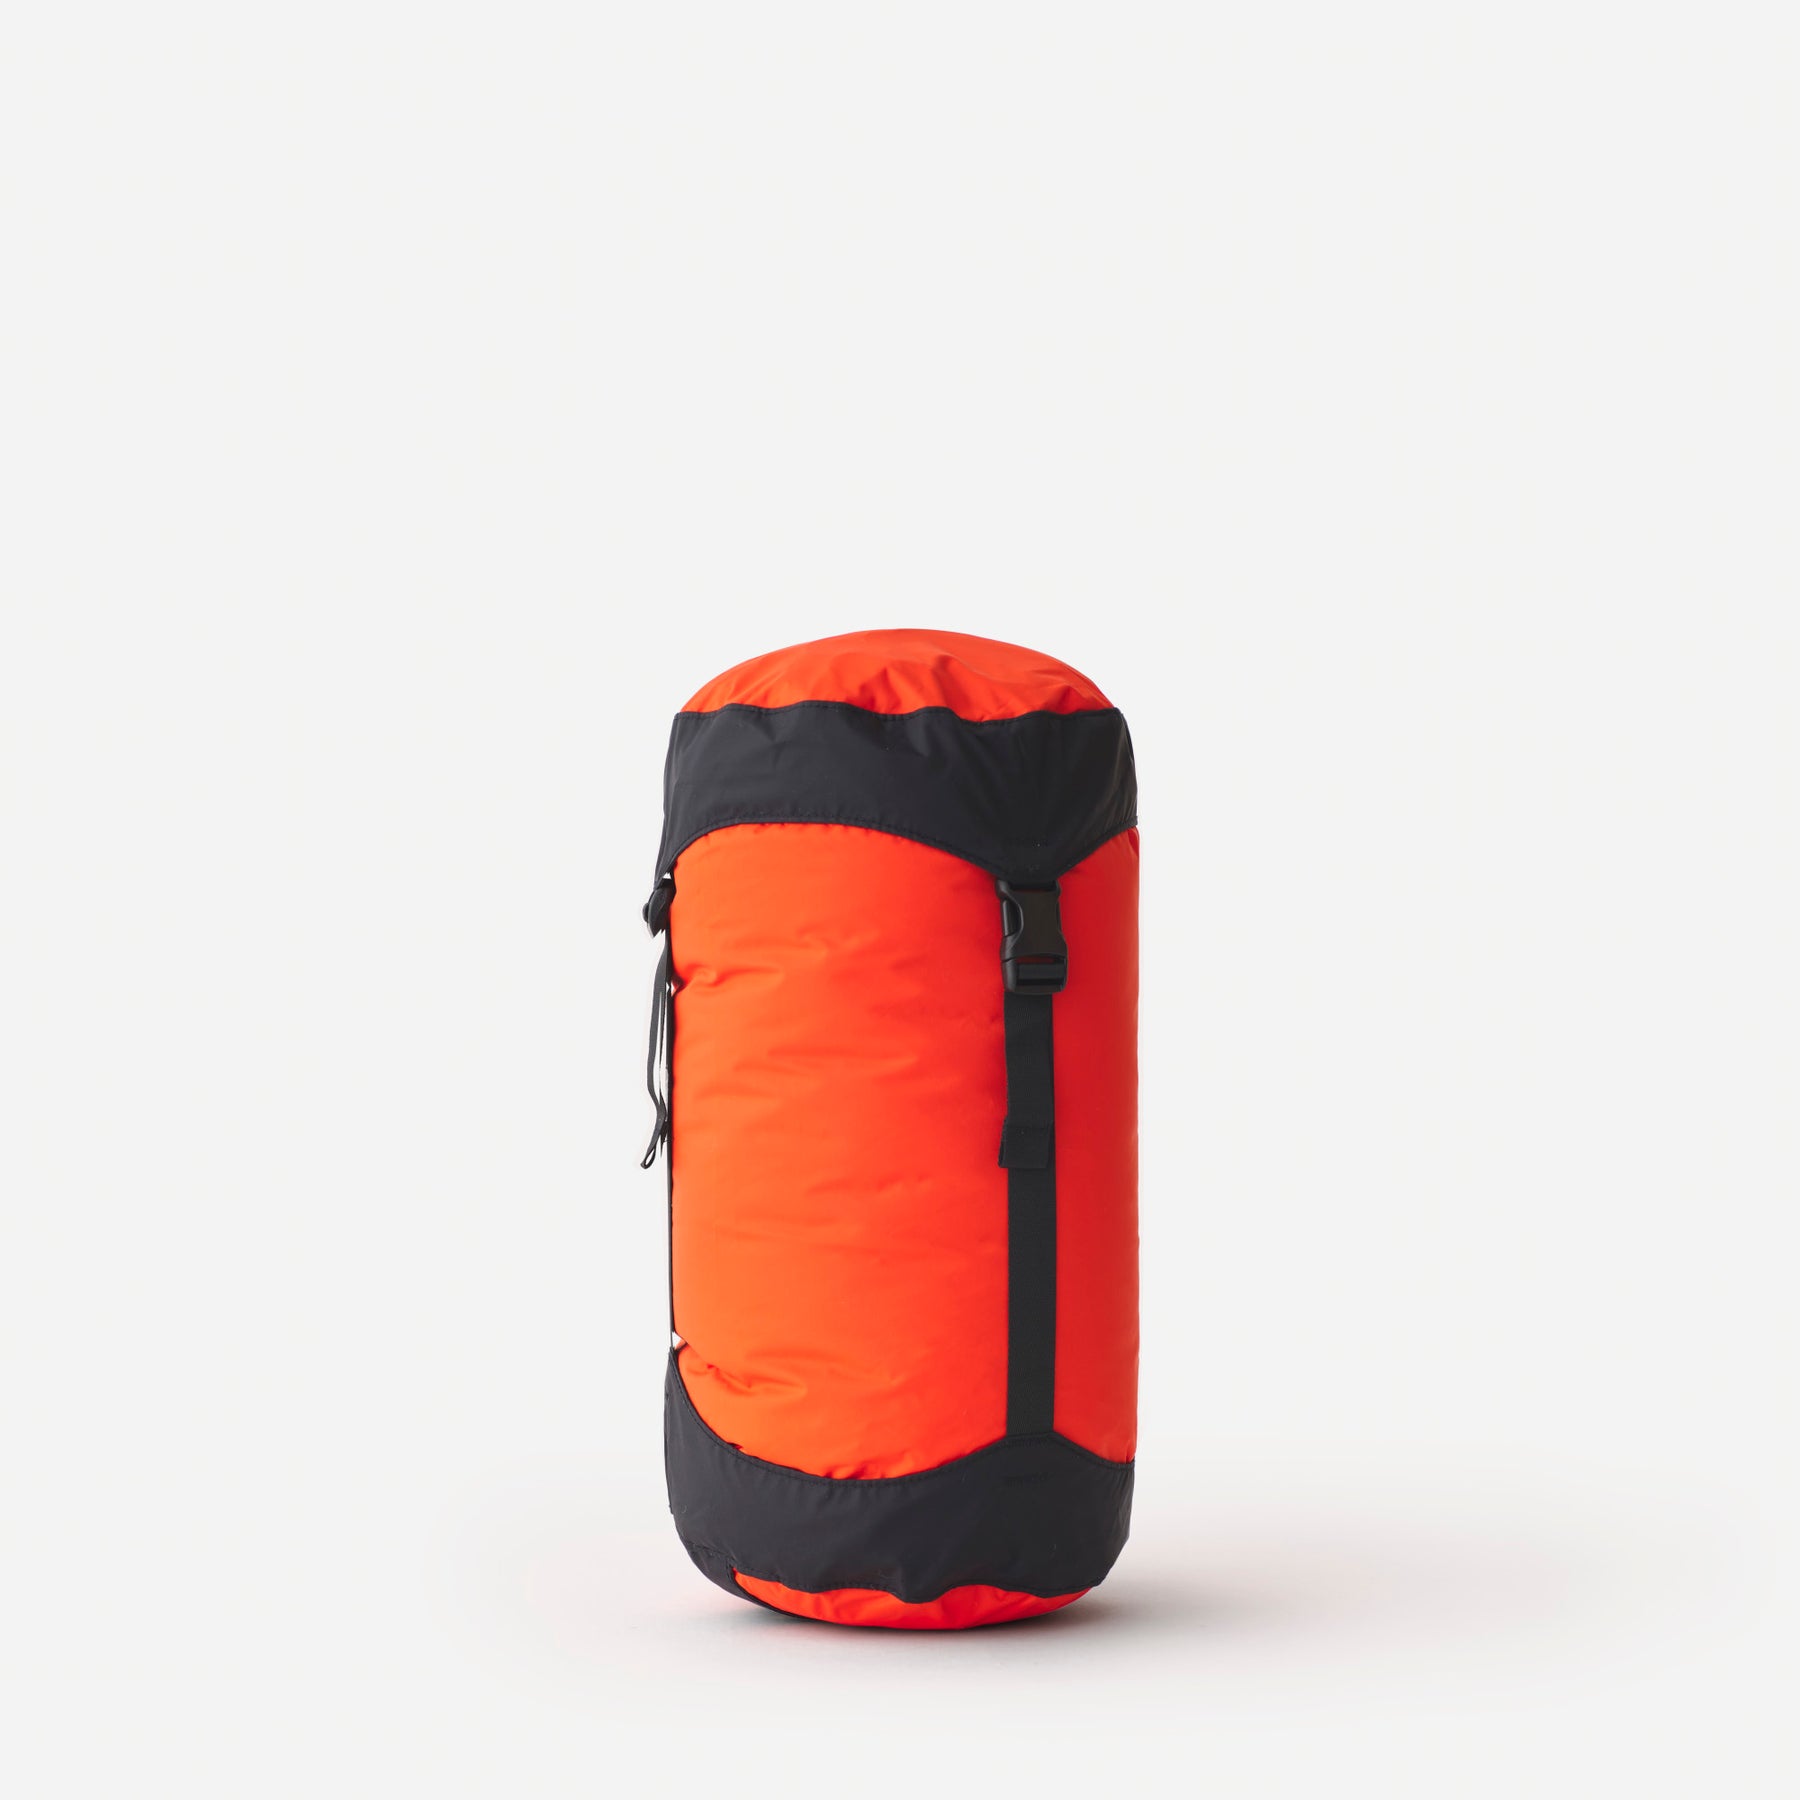 SEA TO SUMMIT LIGHTWEIGHT COMPRESSION SACK 8L SPICY ORANGE Bags Sea To Summit Tactical Gear Supplier Tactical Distributors Australia